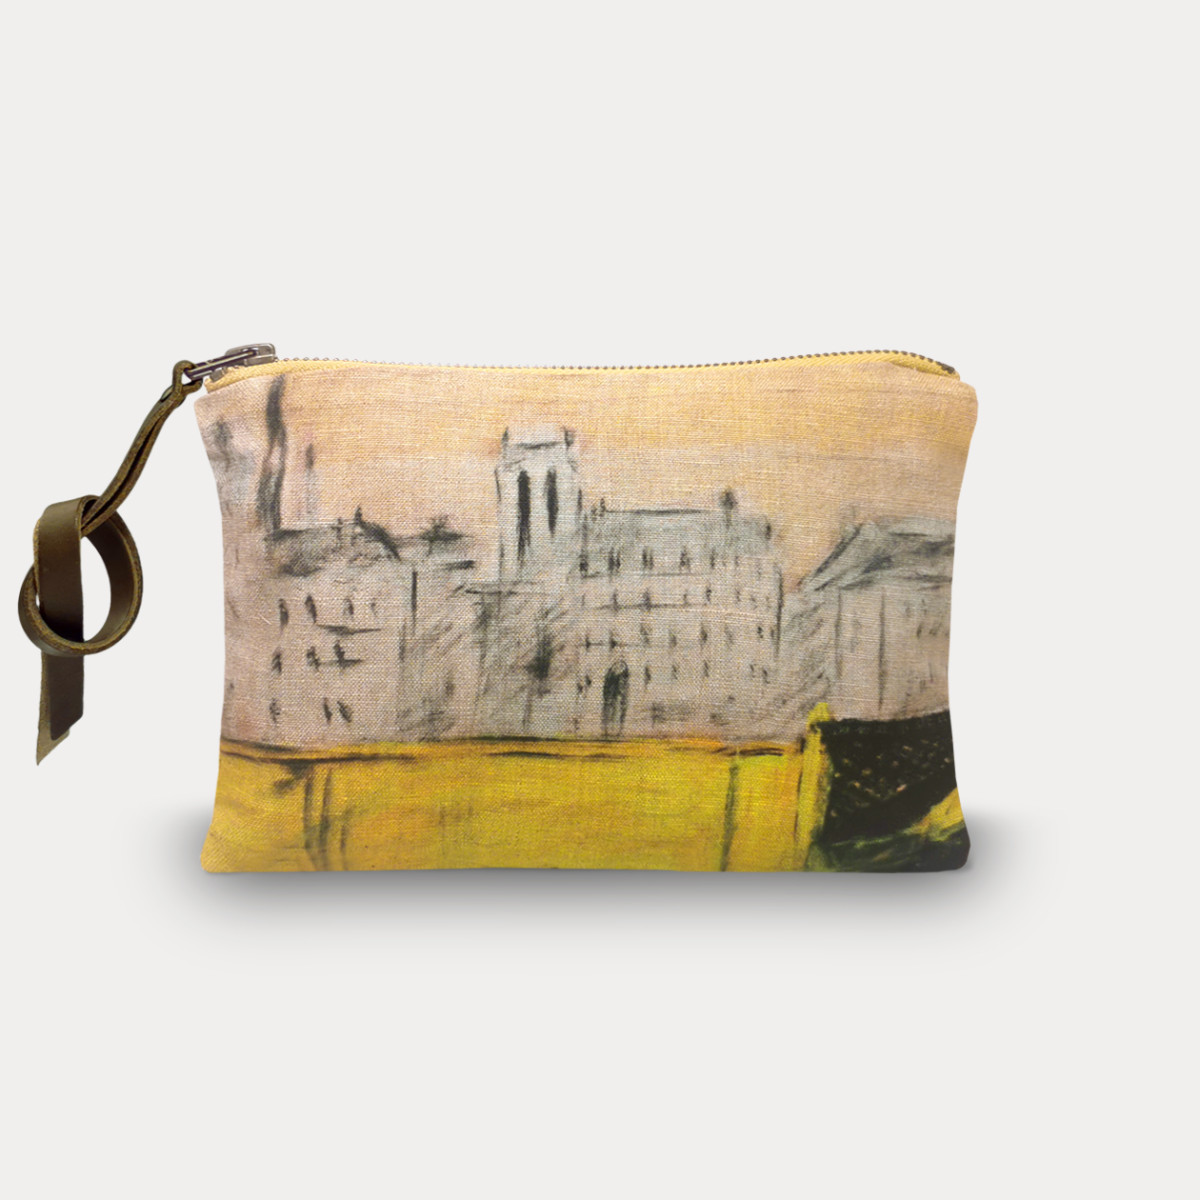 printed linen pouch a bicyclette haby bonomo maison levy made in france